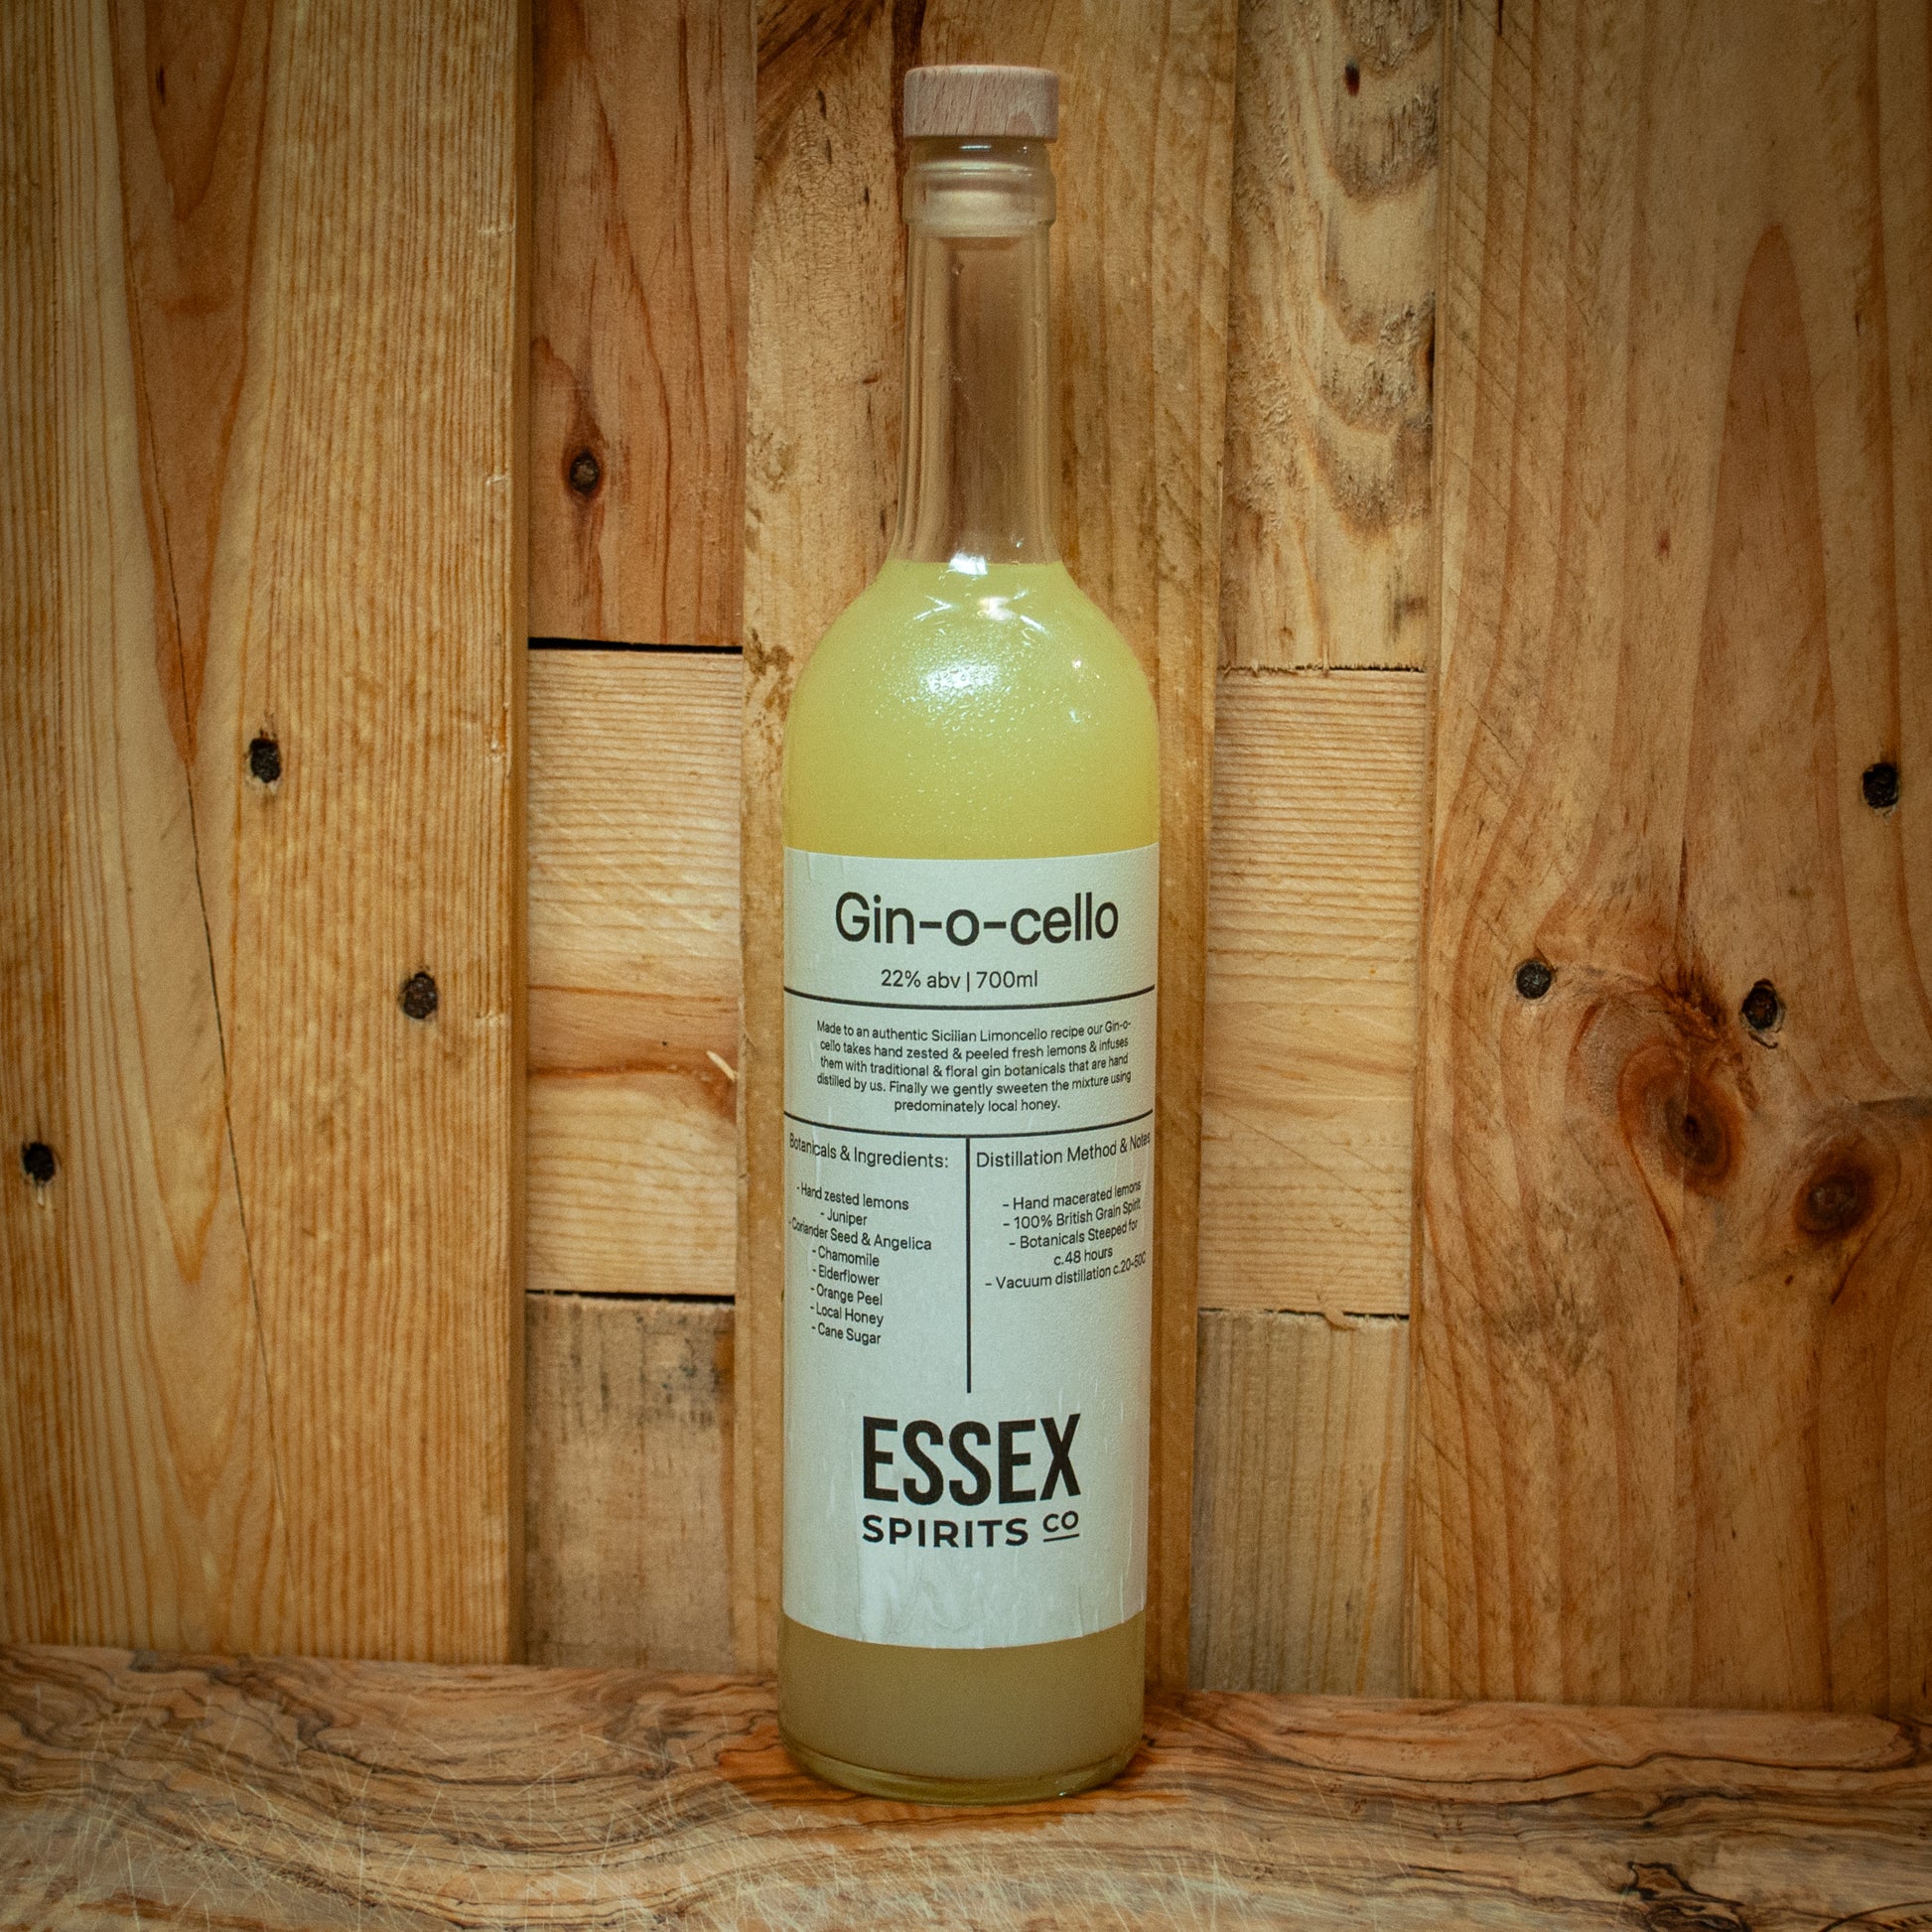 Gin-o-cello from Essex Spirits Company, Chelmsford Distillery